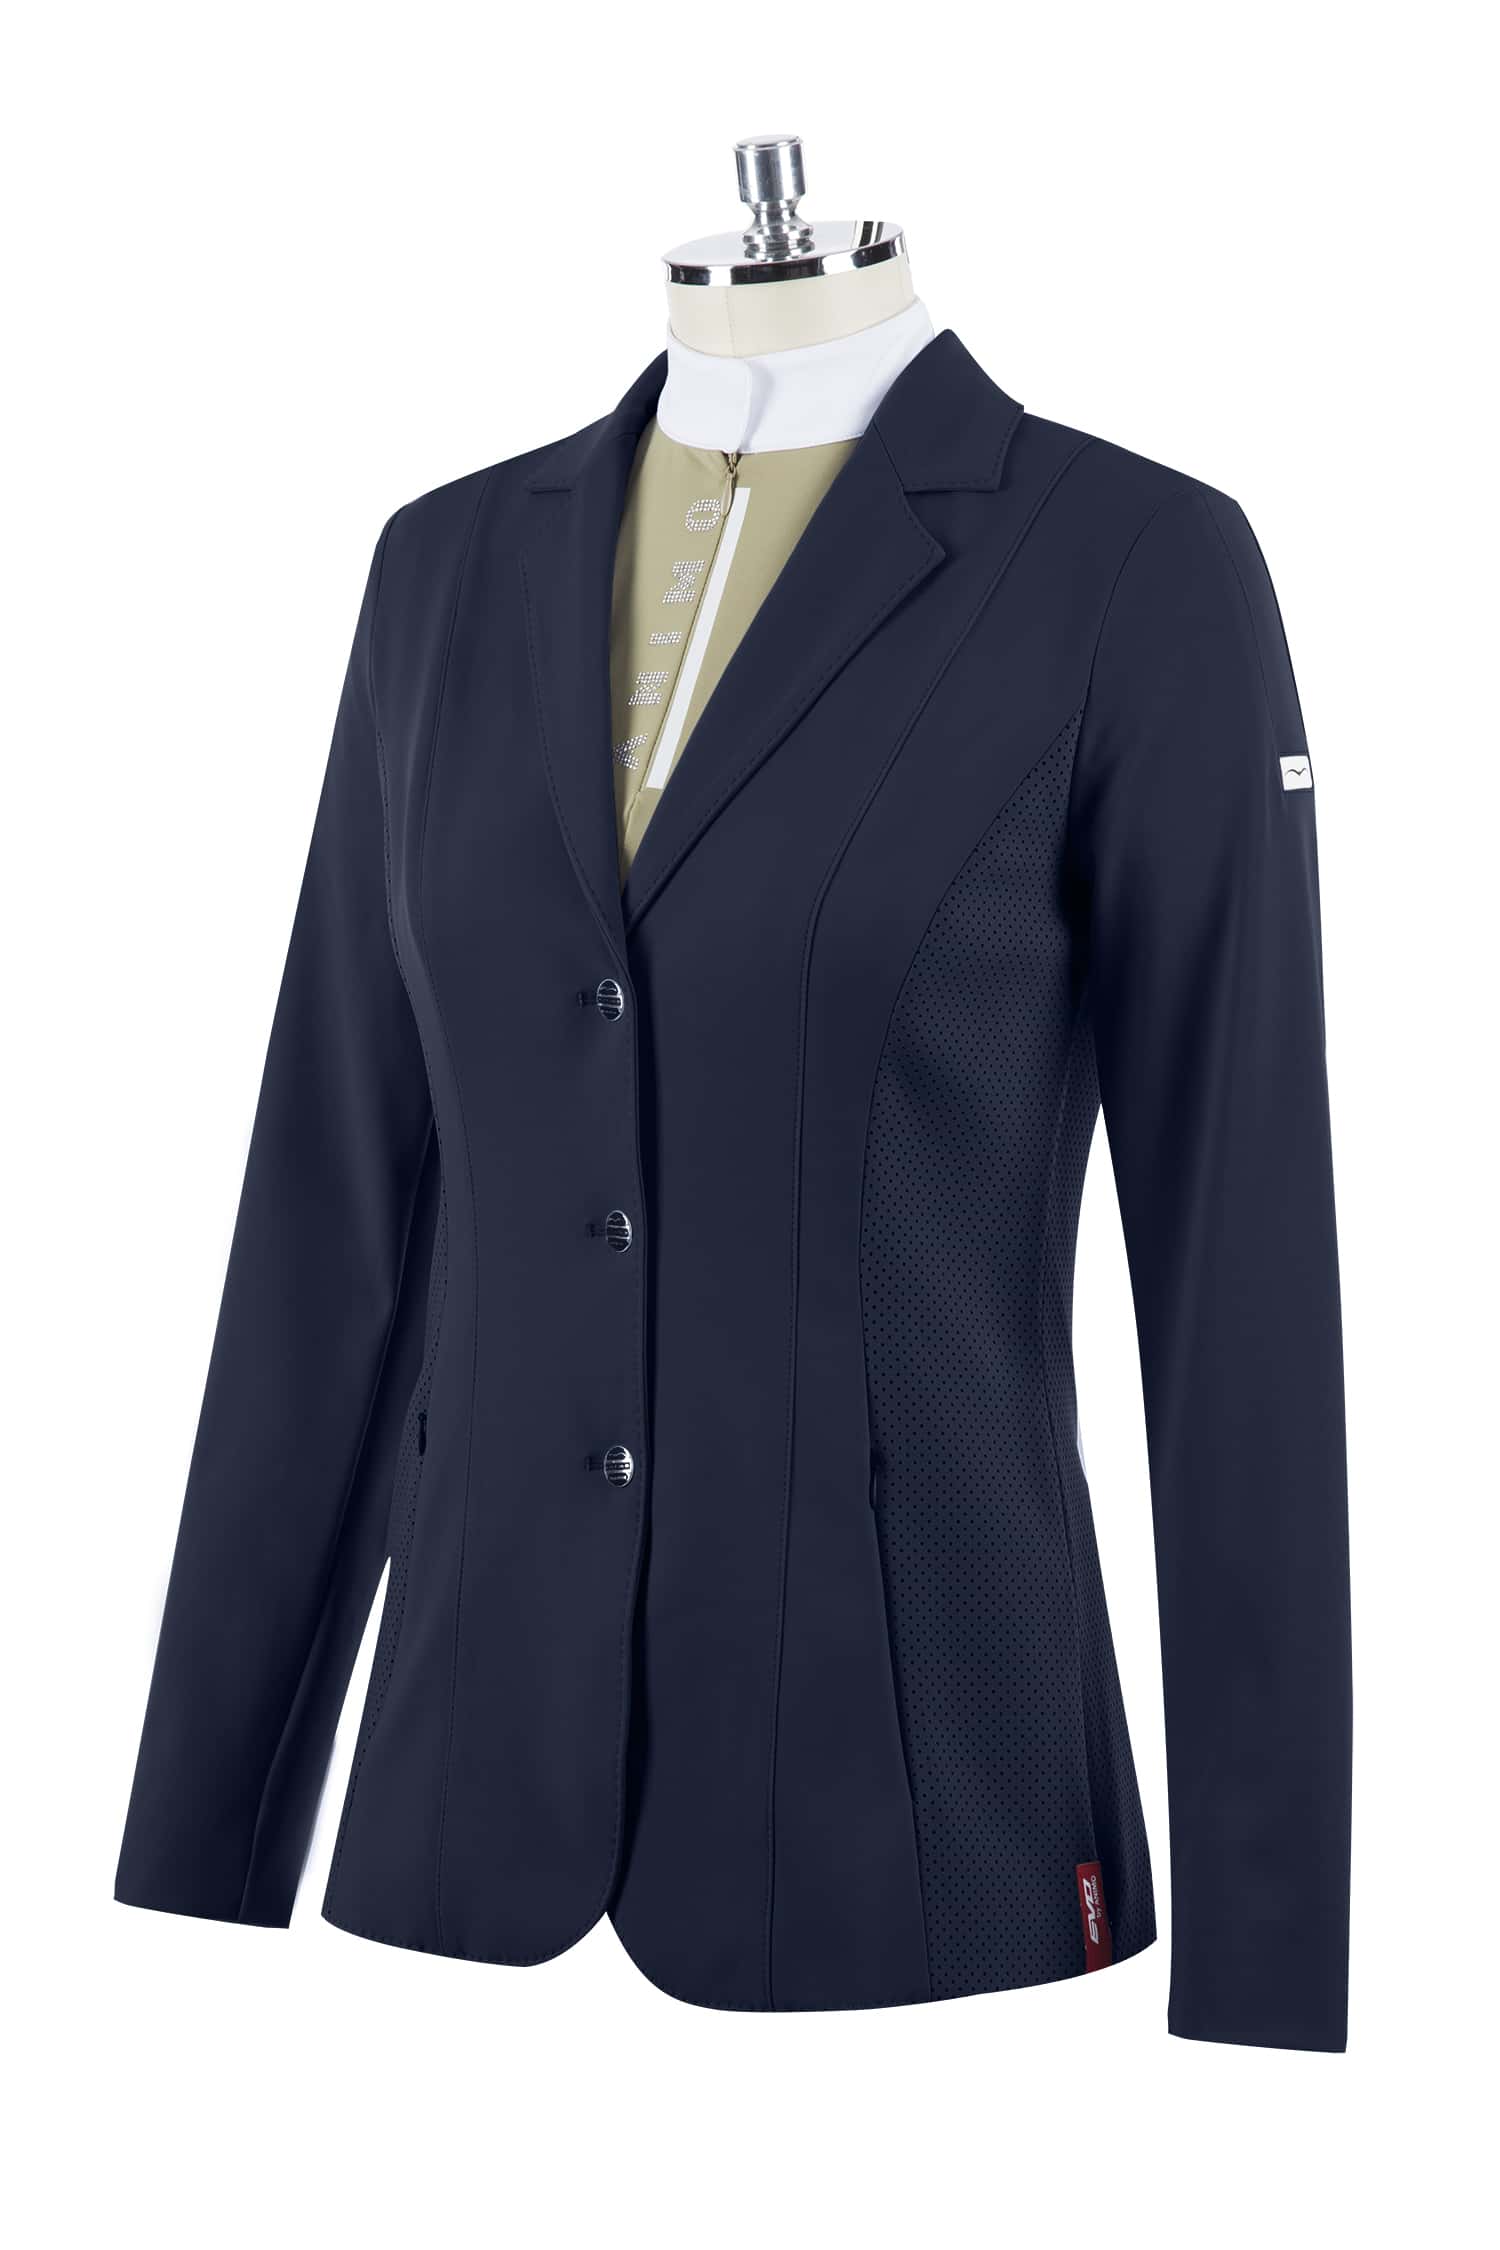 Animo Lincanto 23S Women's Competition Jacket